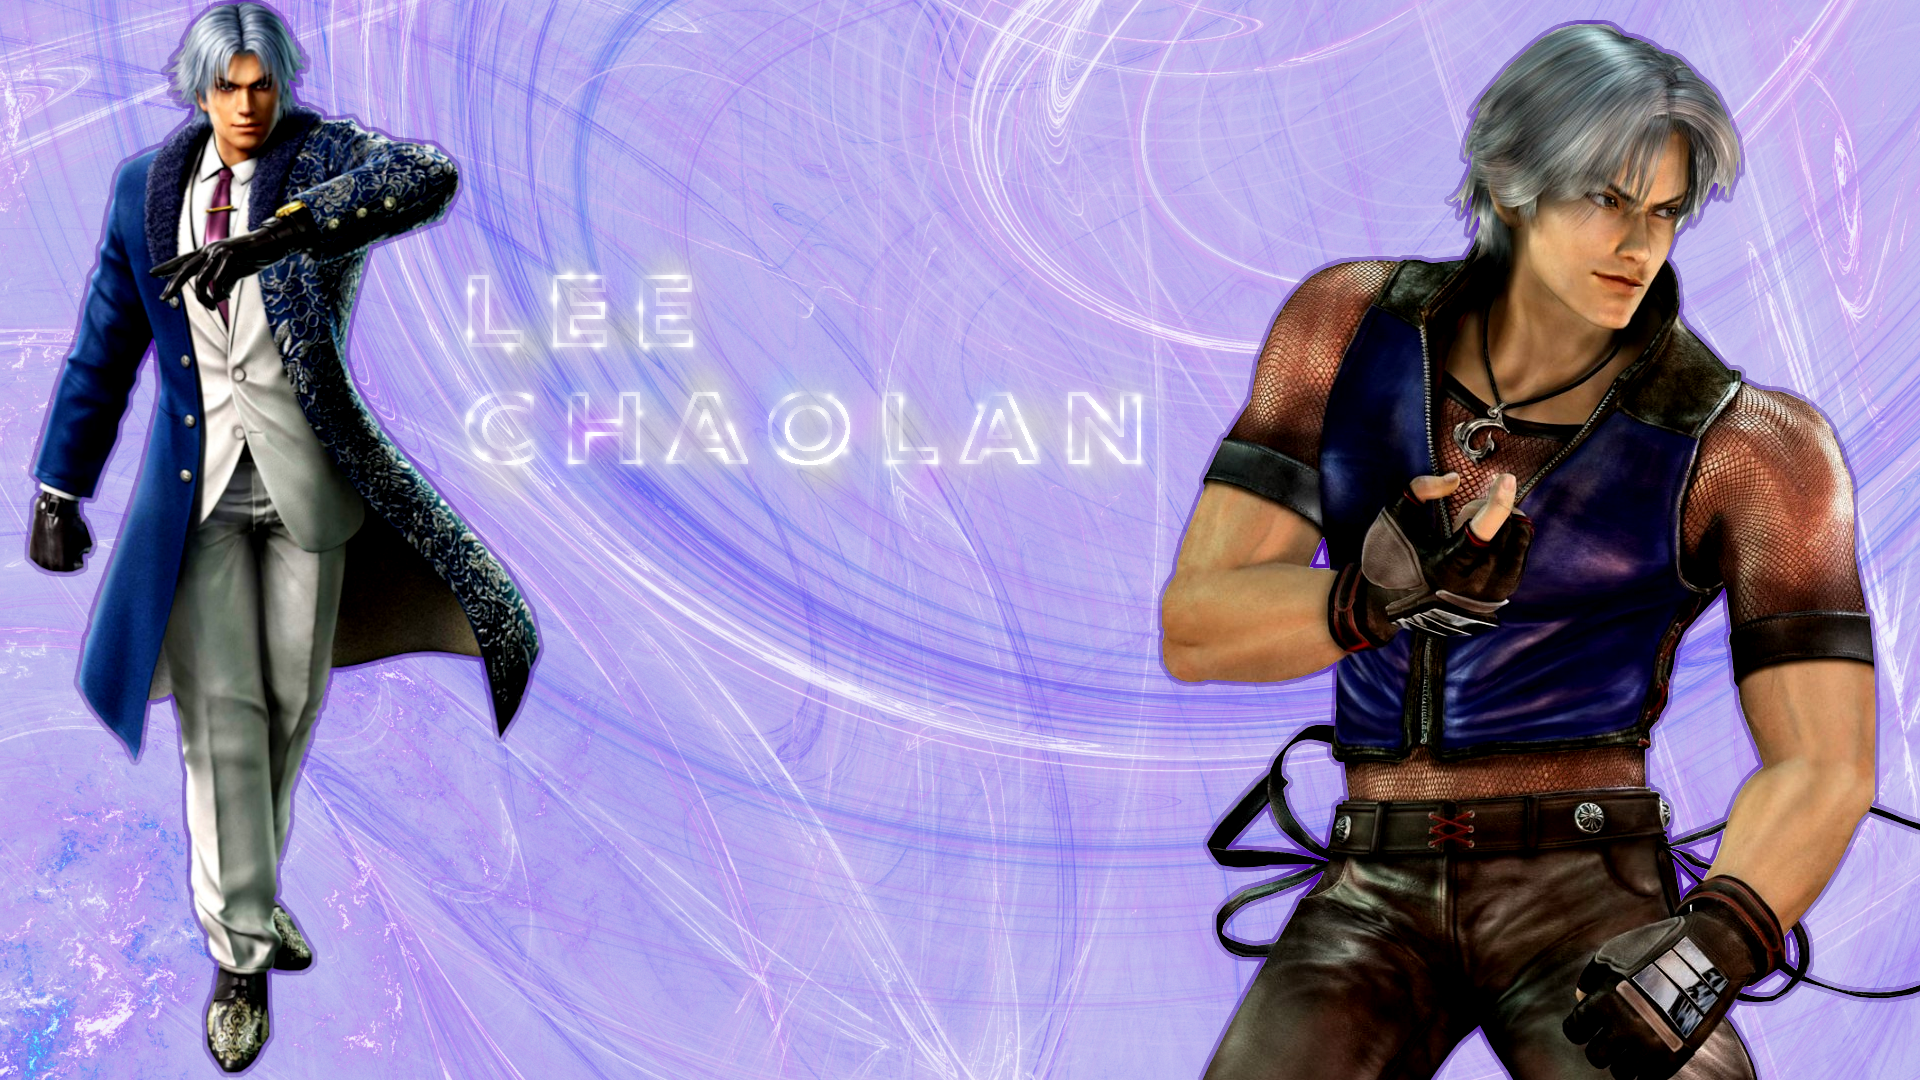 Been messing with GIMP, here's a Lee Chaolan wallpaper I made